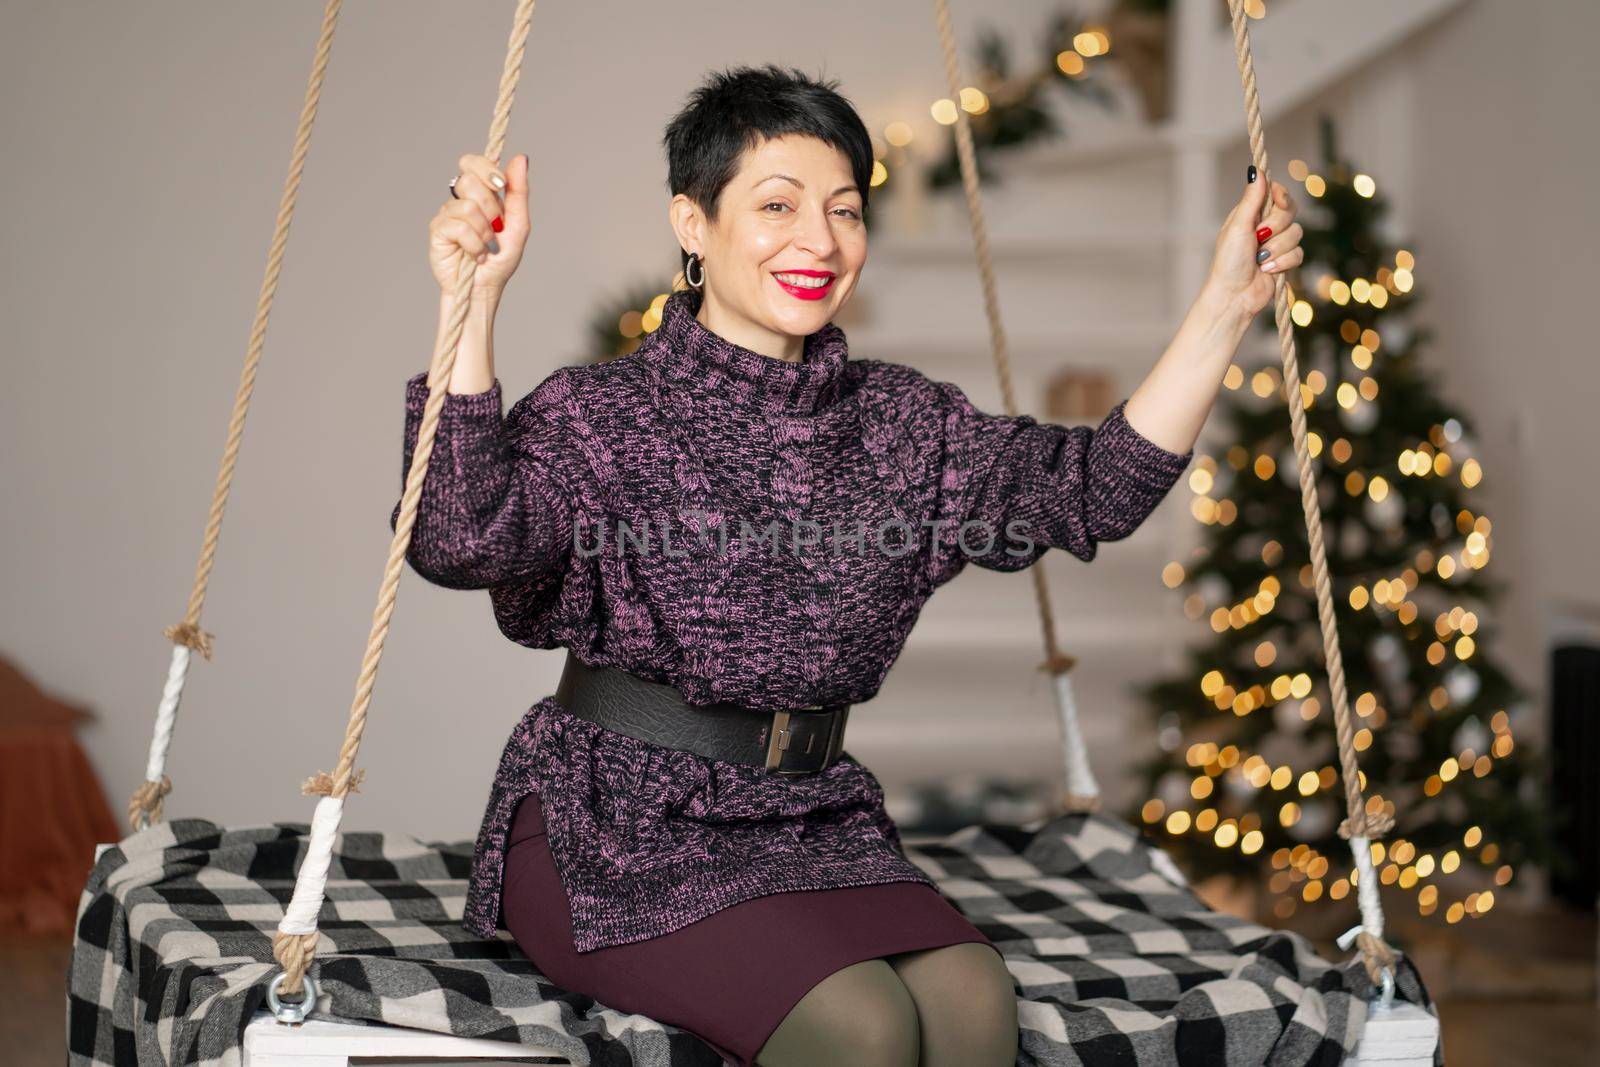 Smiling brunette woman with short hair, with tired eyes on a swing in the room.